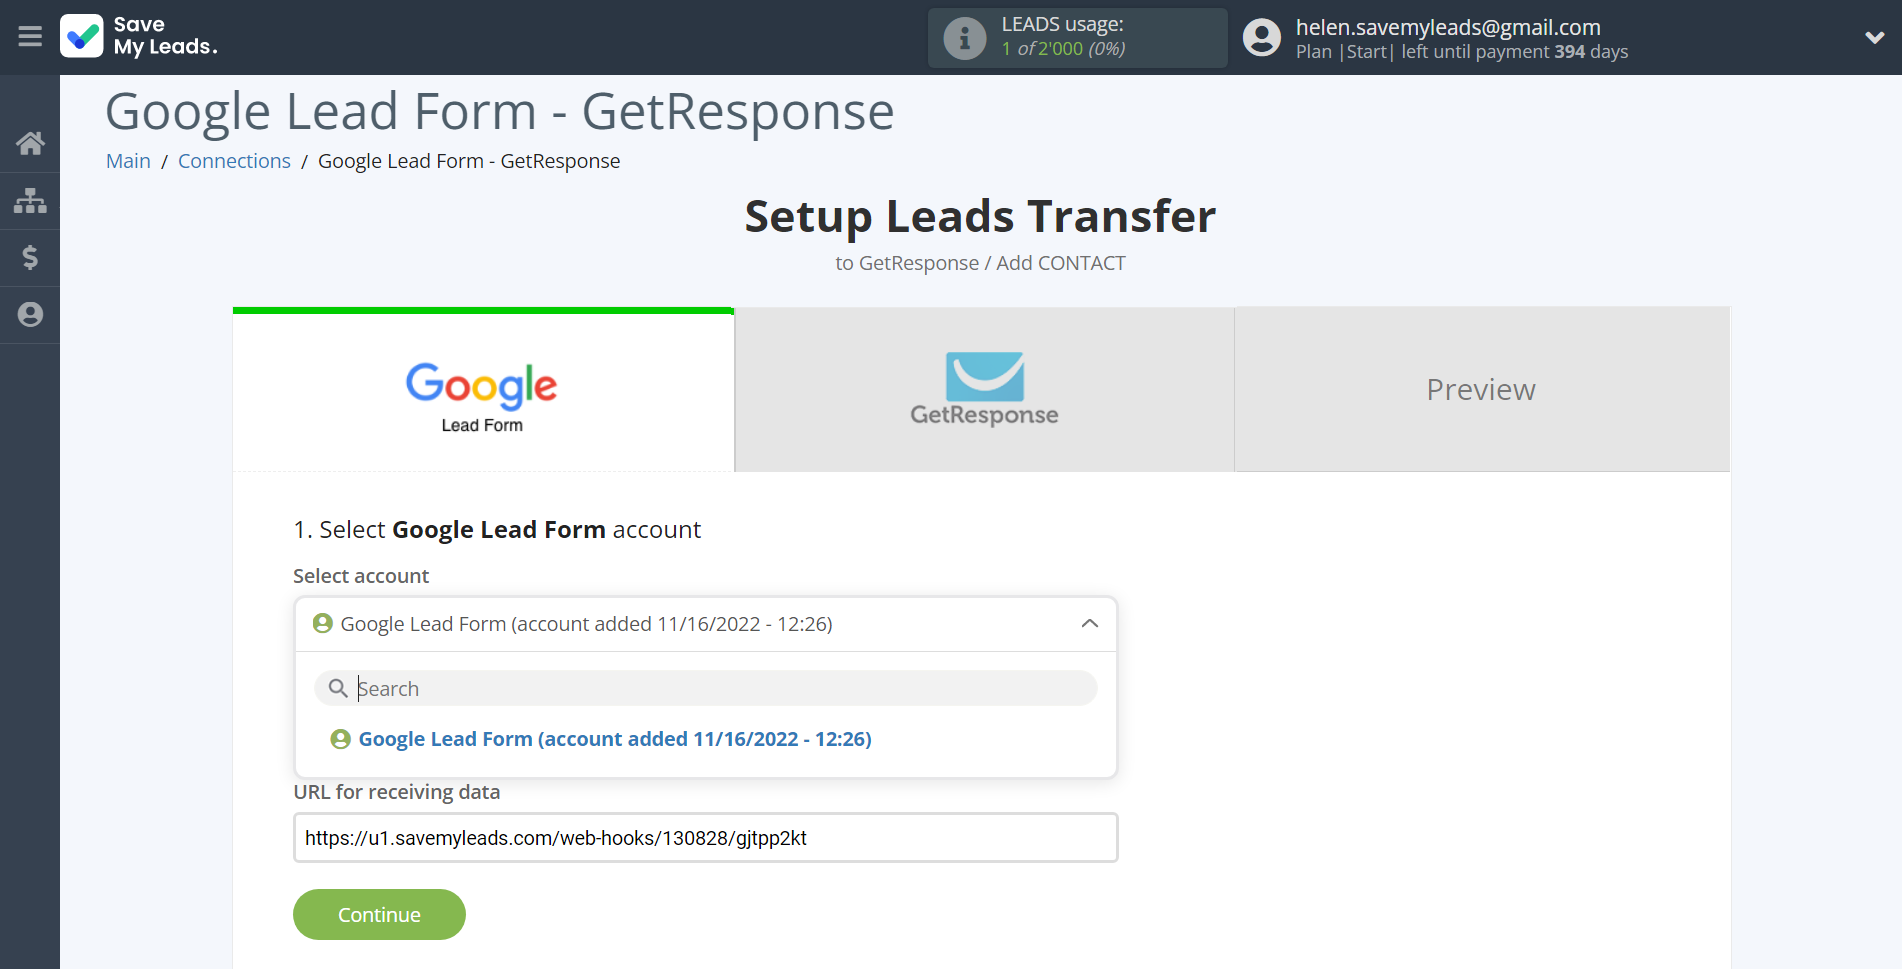 How to Connect Google Lead Form with GetResponse | Data Source account selection